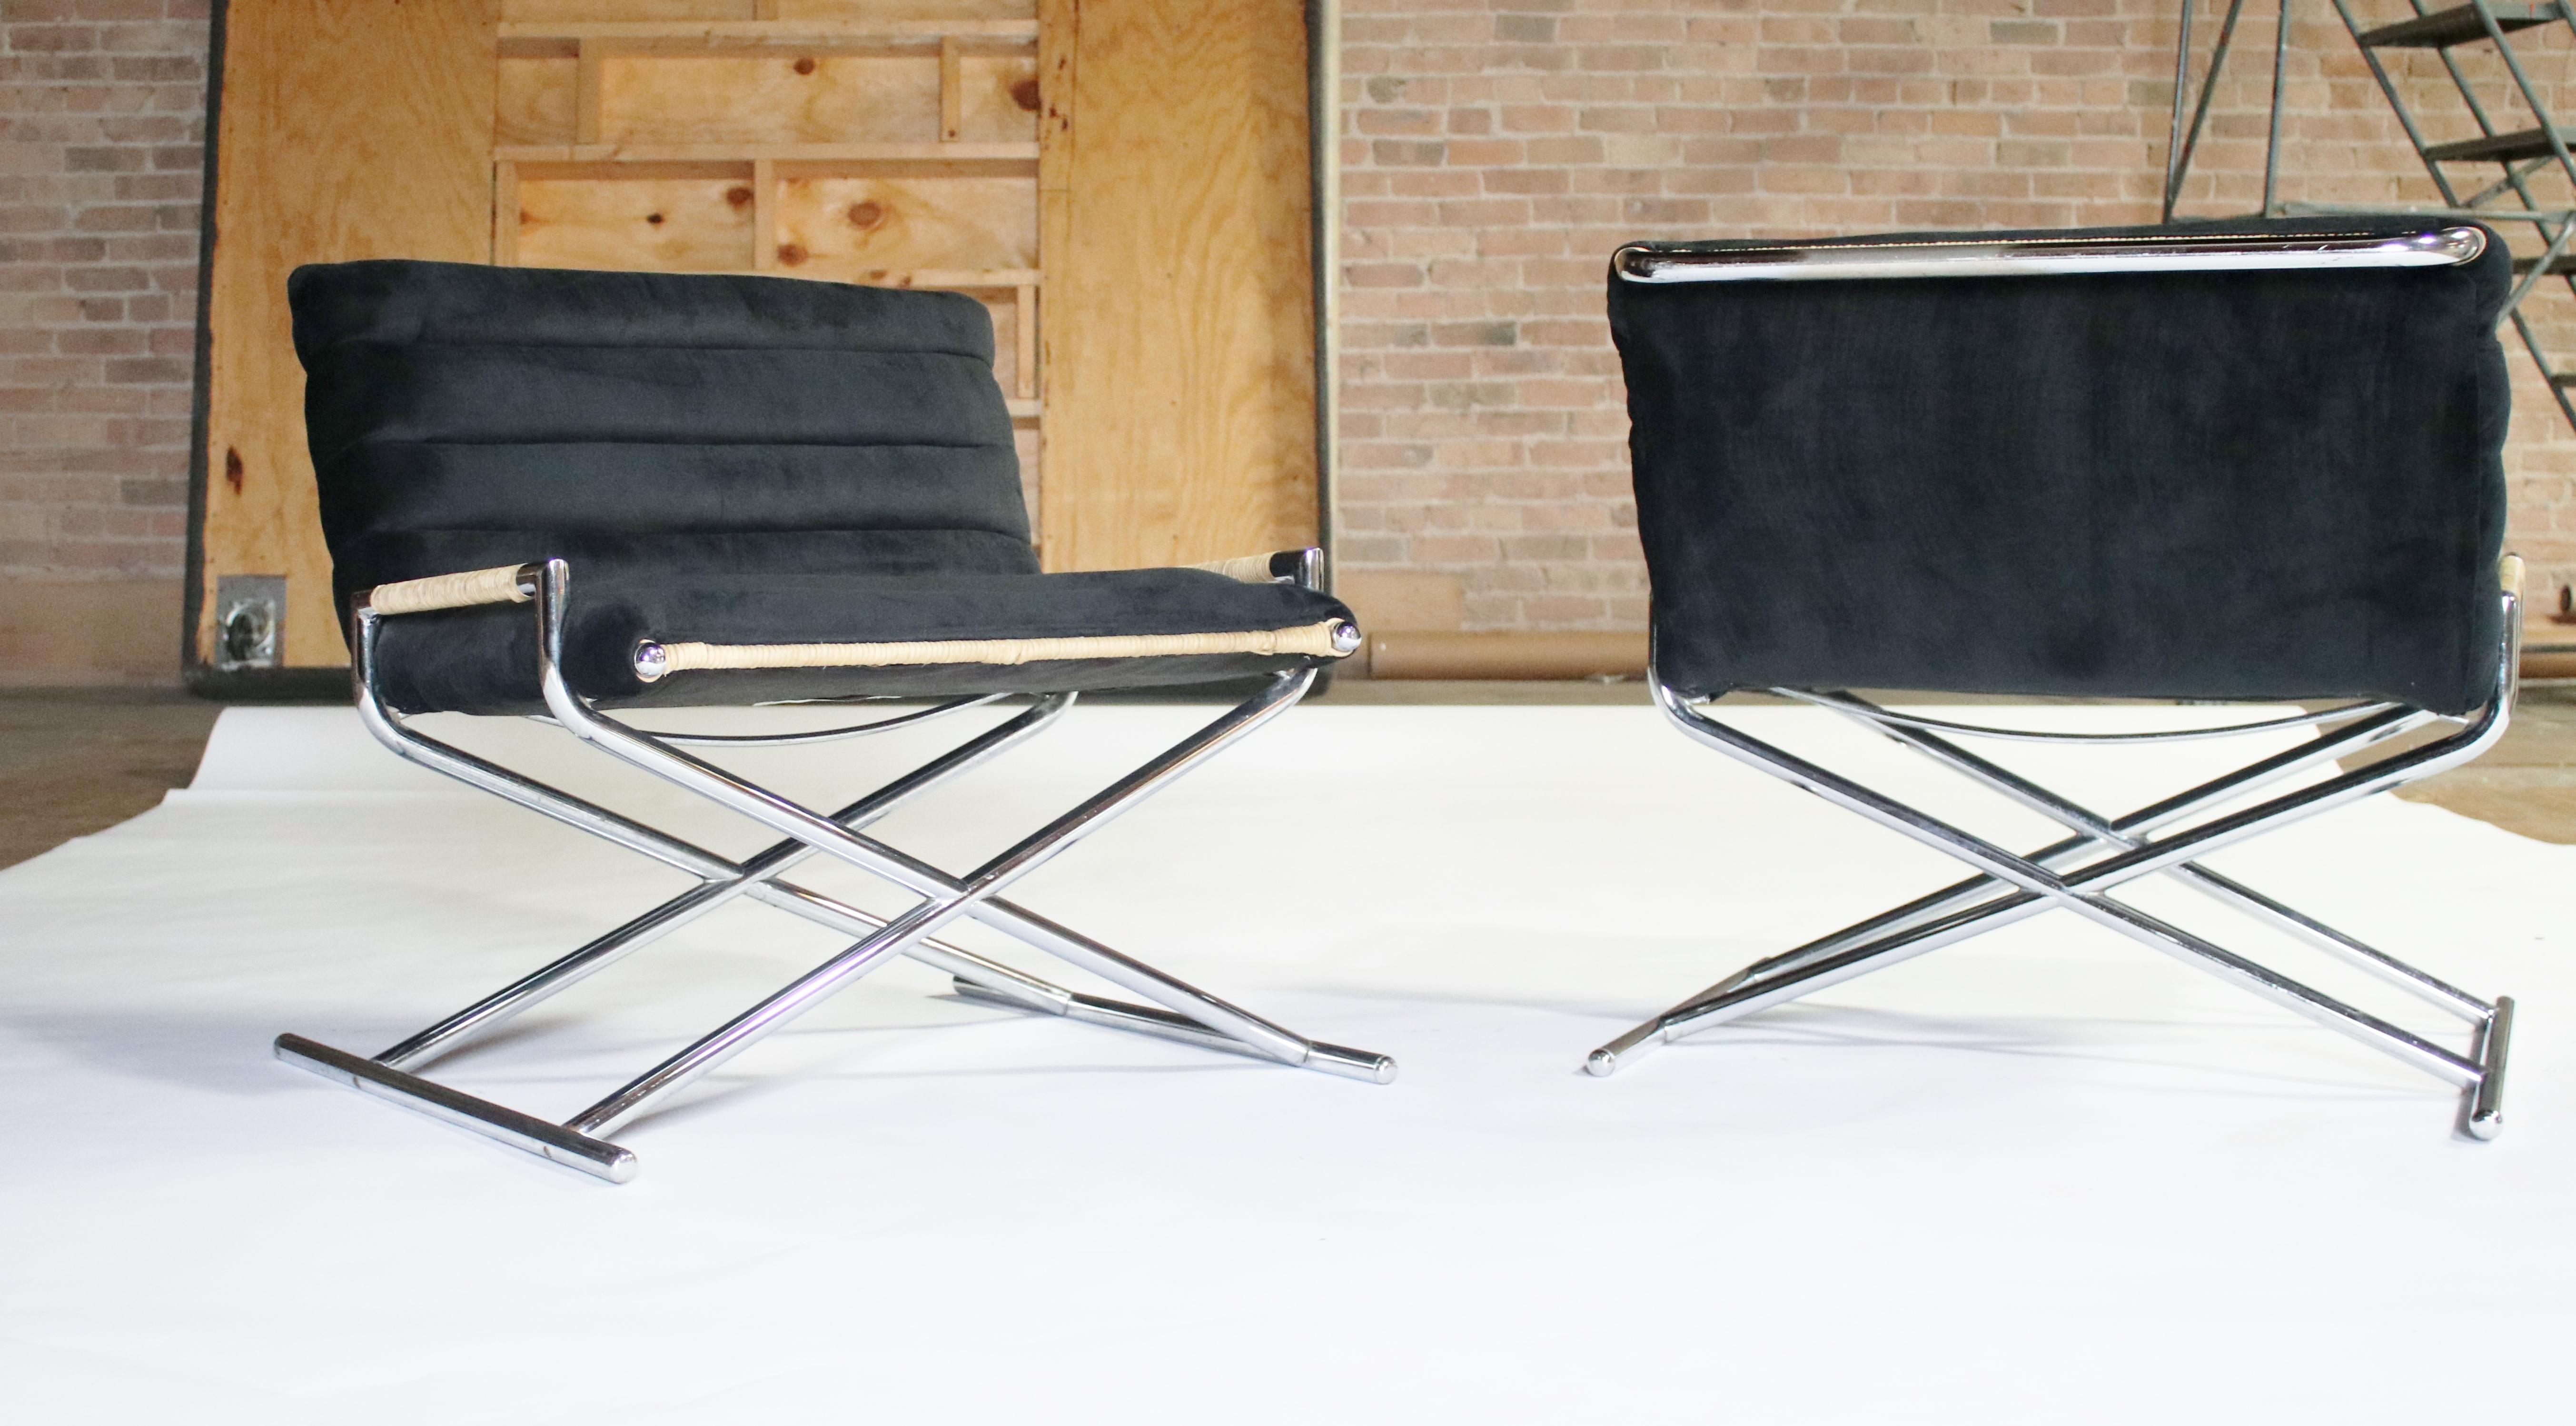 Pair of upholstered and rattan sled chairs on chrome frame by Ward Bennett for Brickell, 1984. Labelled.